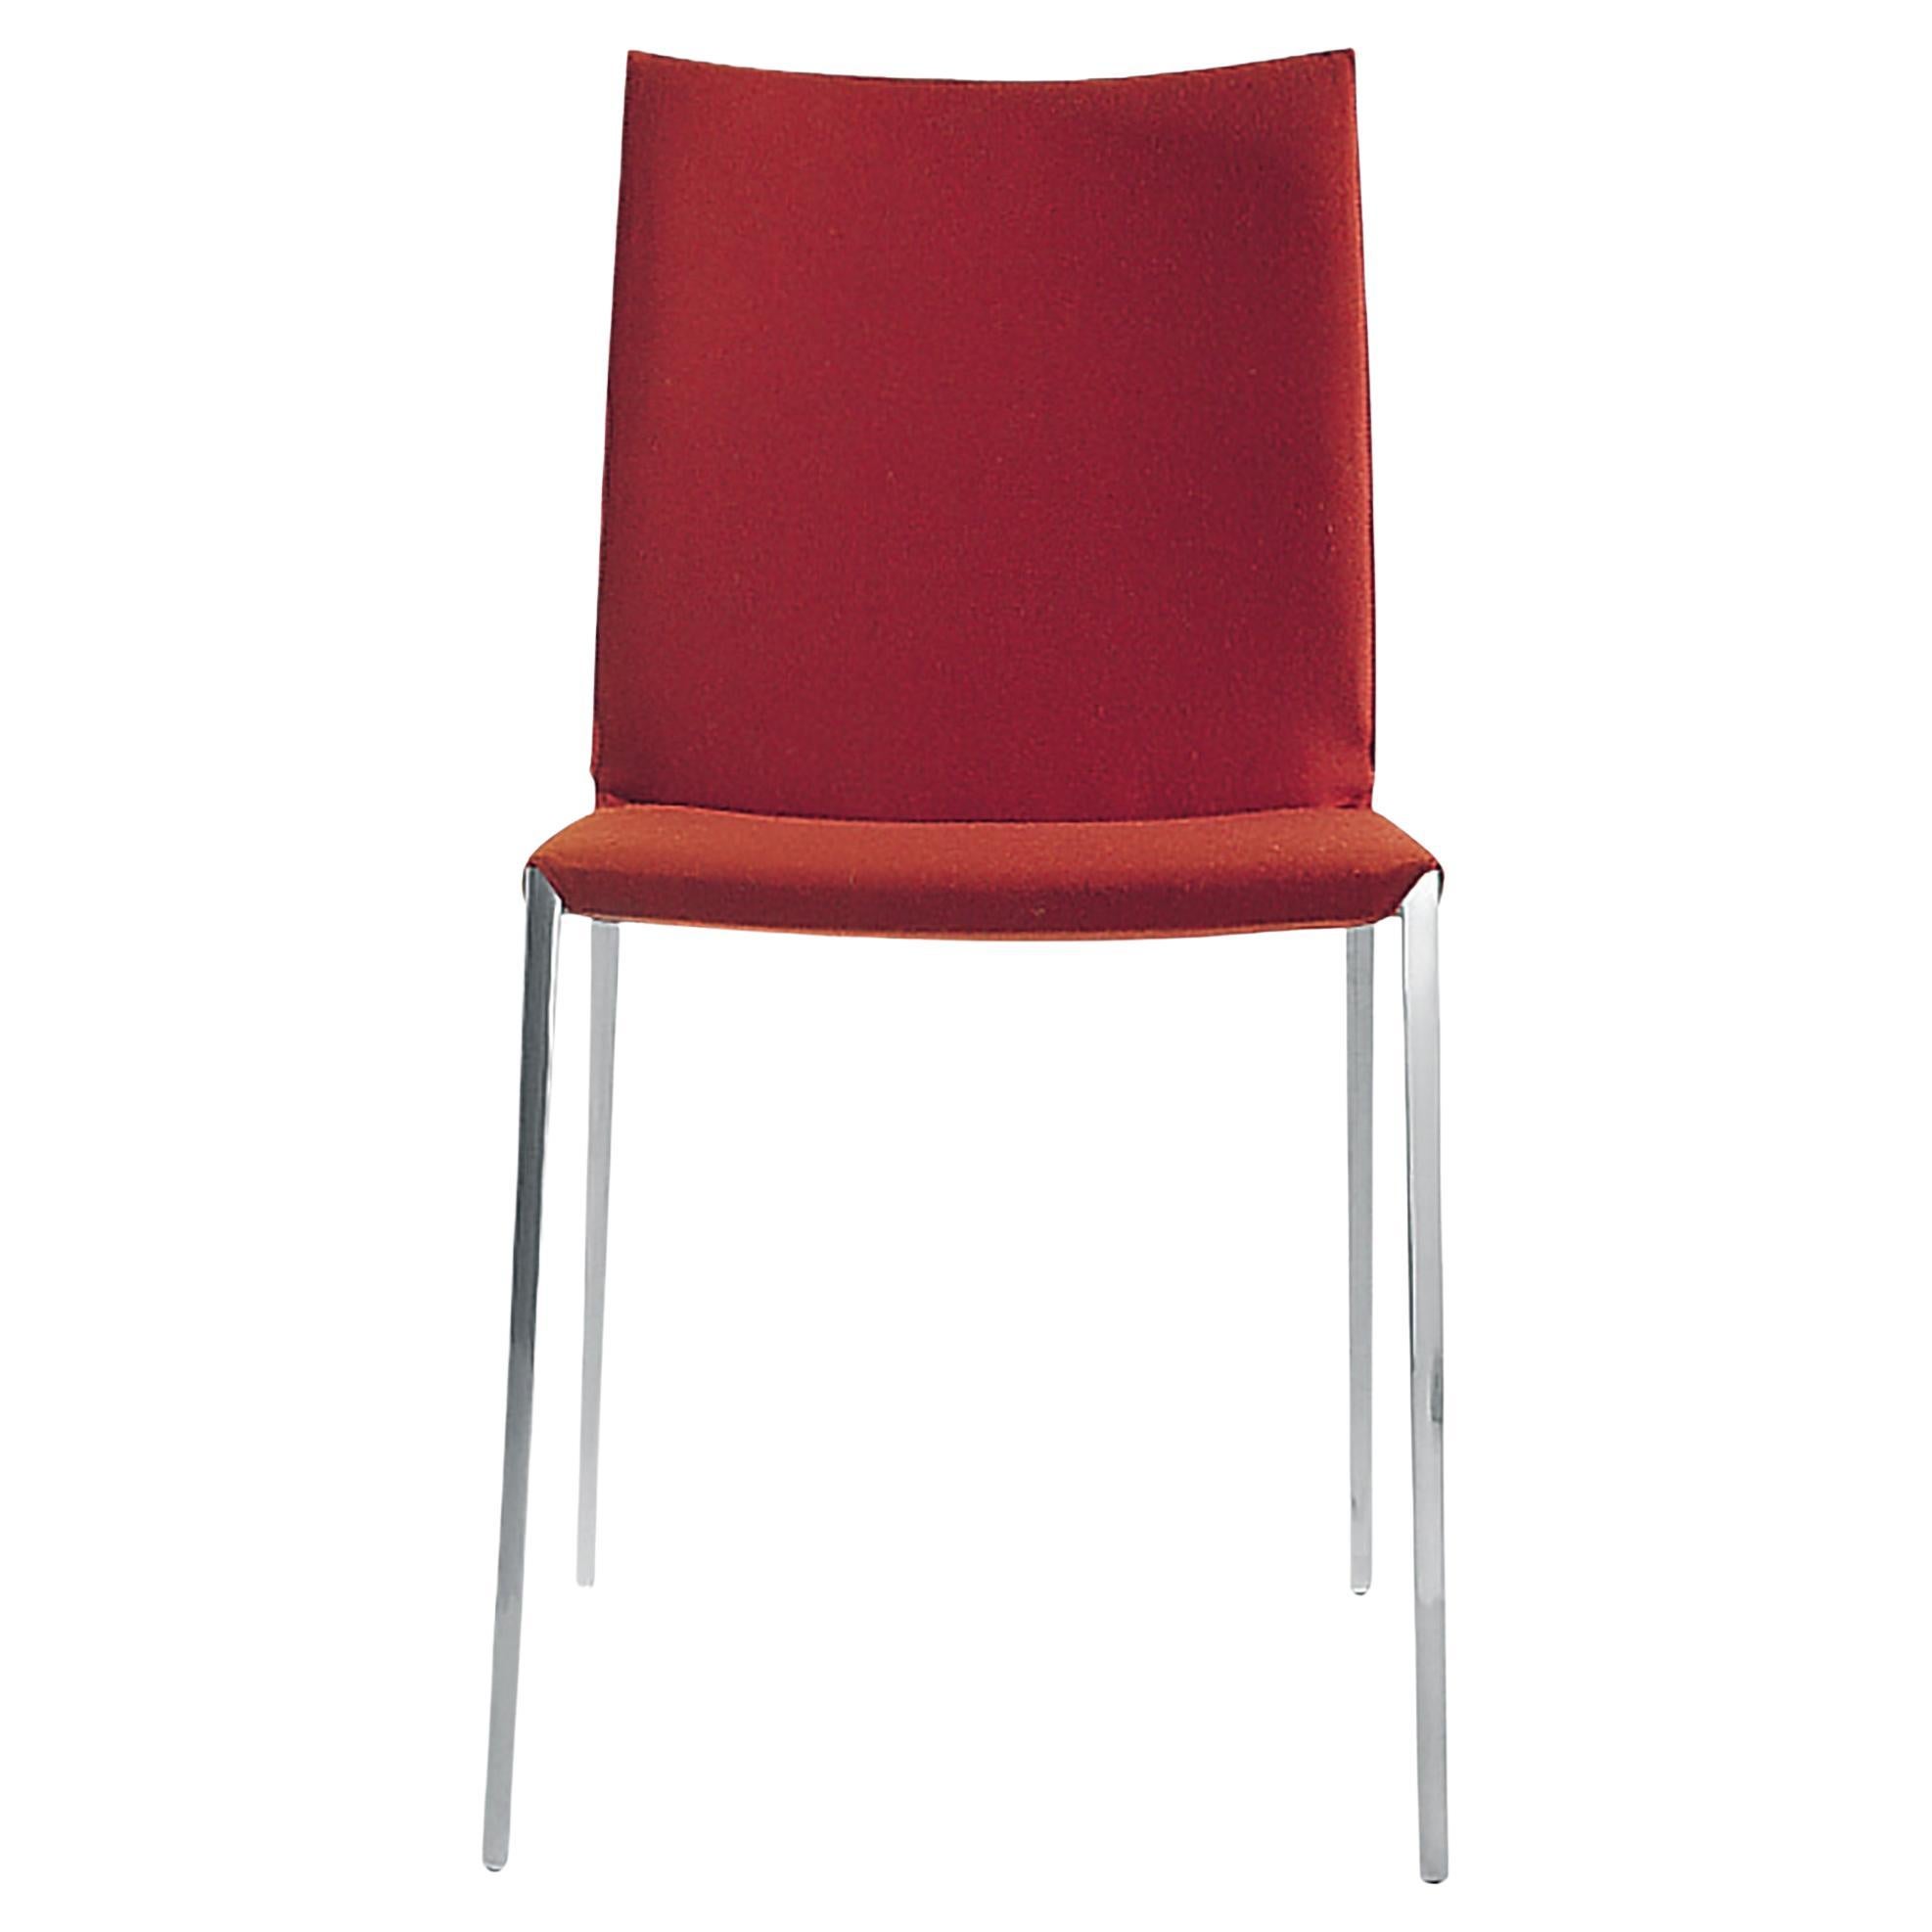 Zanotta Lia Chair in Red Fabric with Polished Aluminum Frame by Roberto Barbieri For Sale